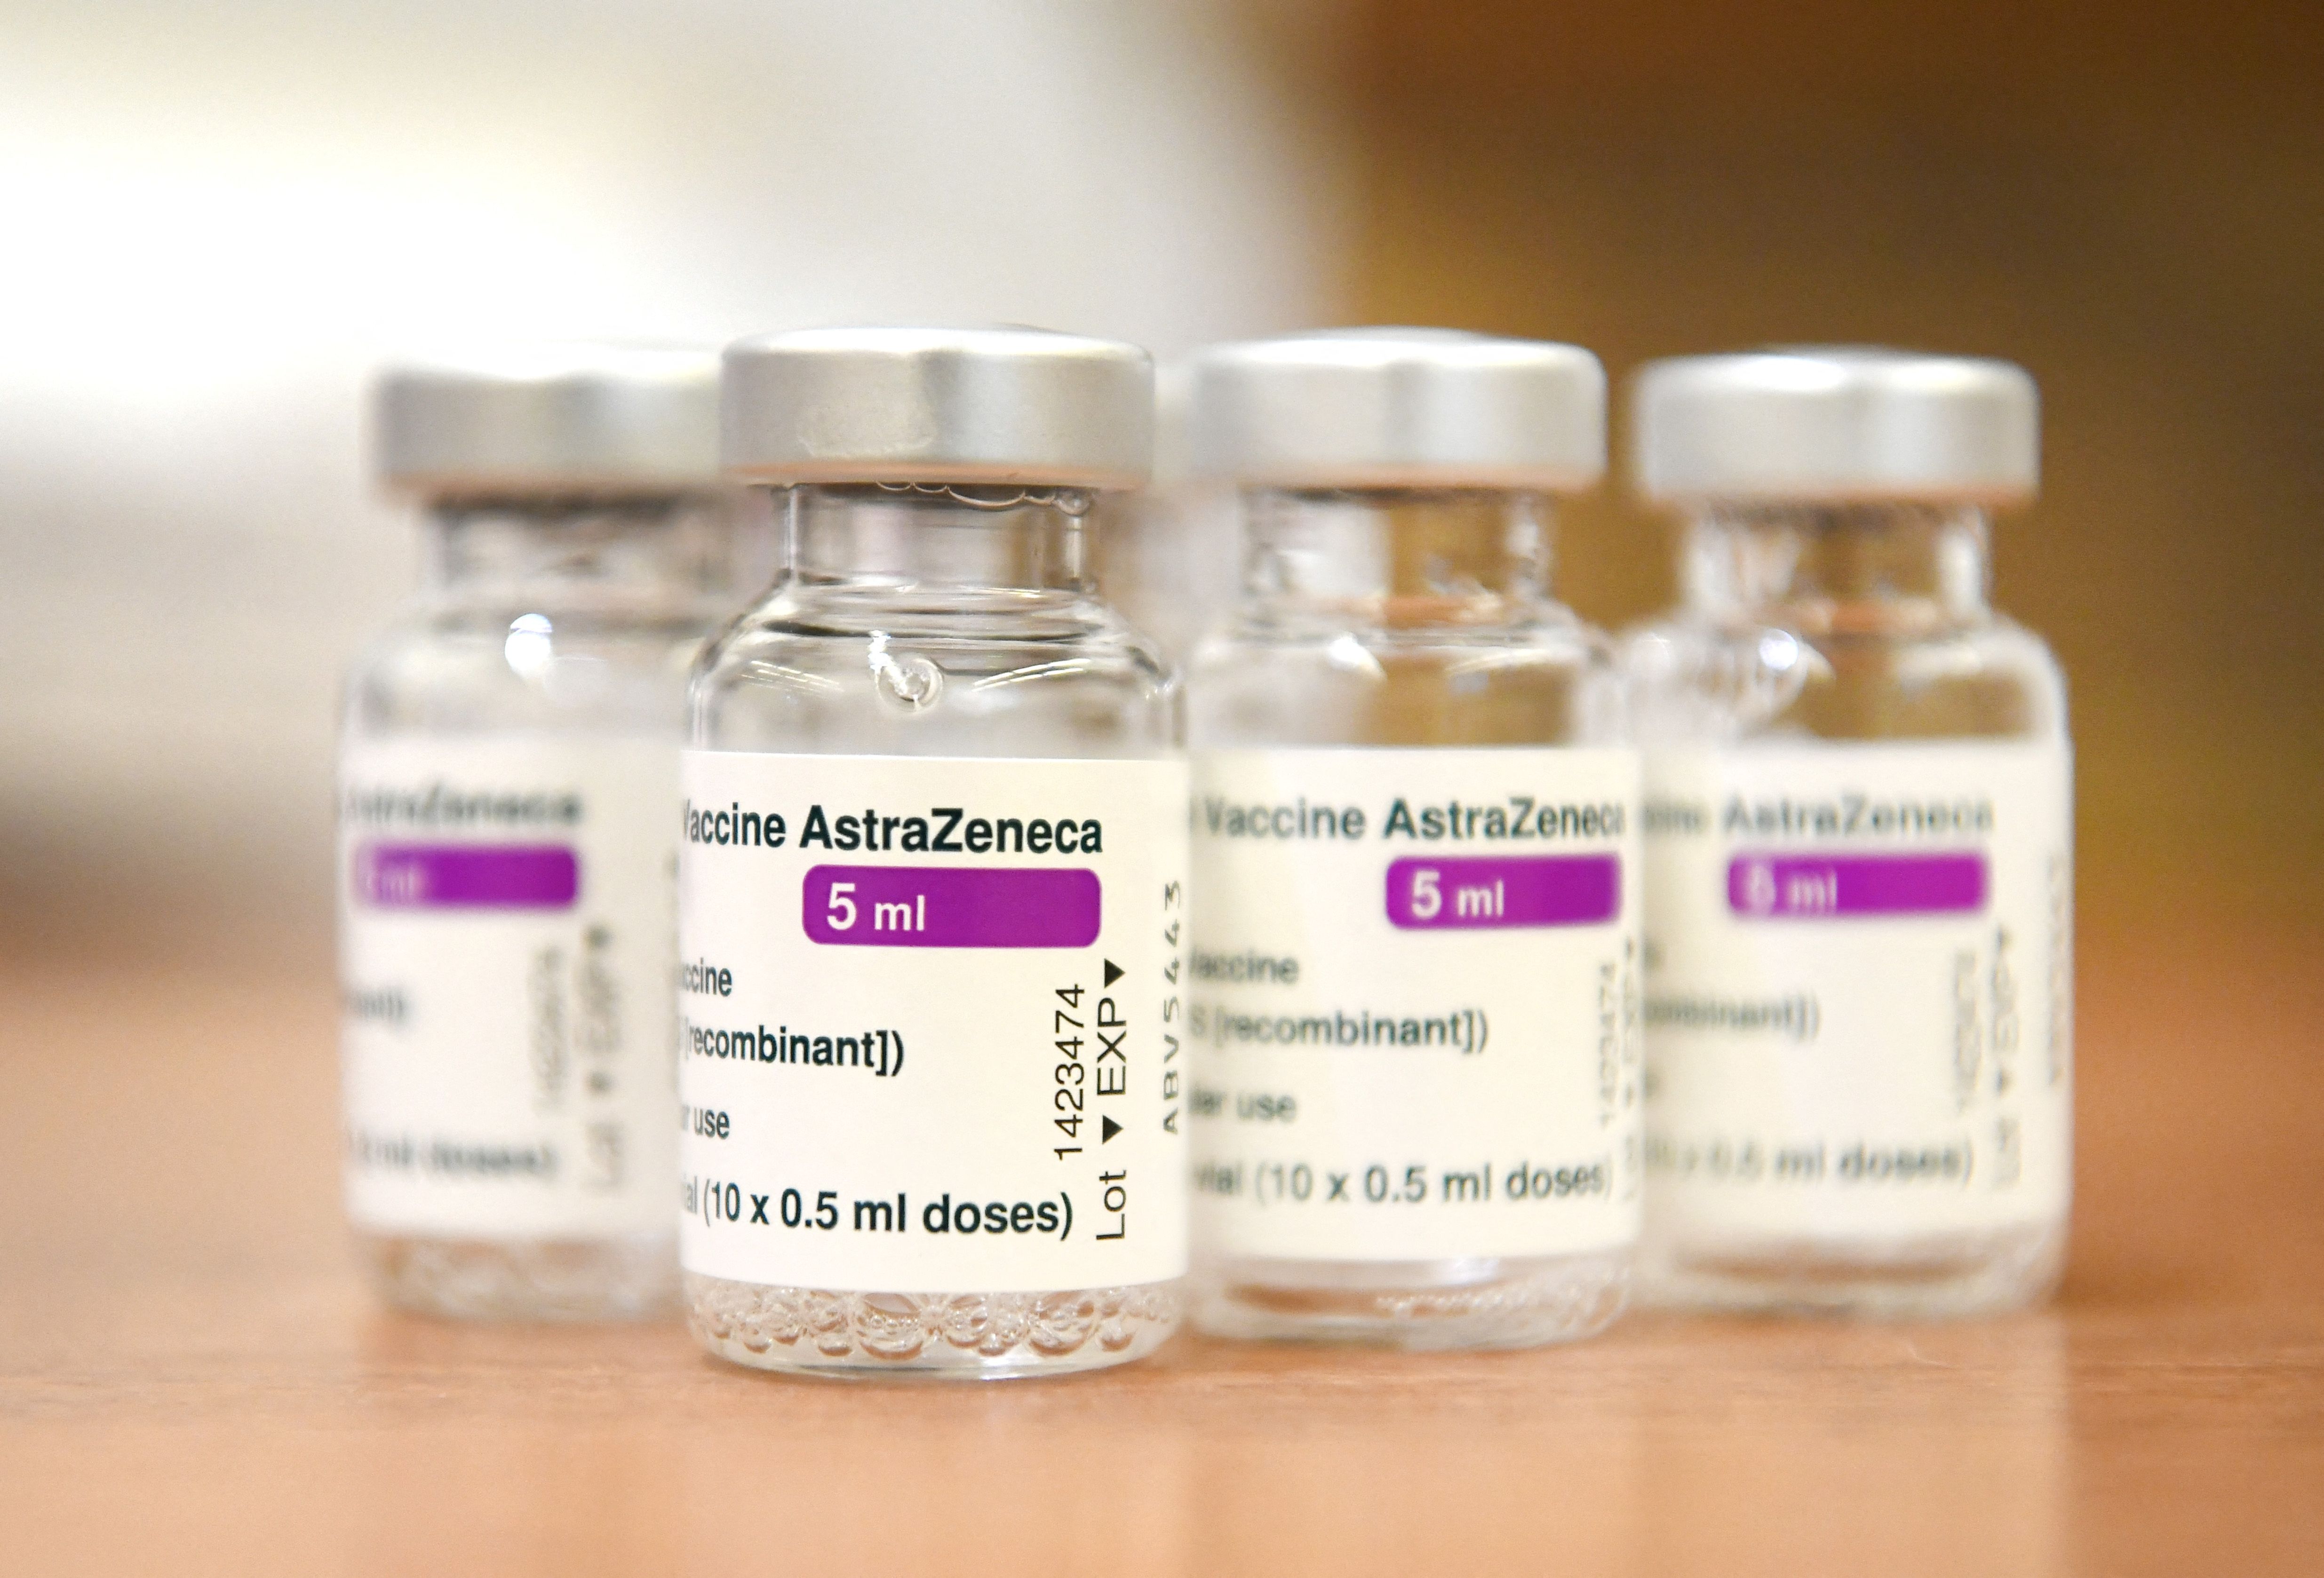 Vials of the AstraZeneca Covid-19 vaccine are seen on March 20, in Ede, Netherlands. 